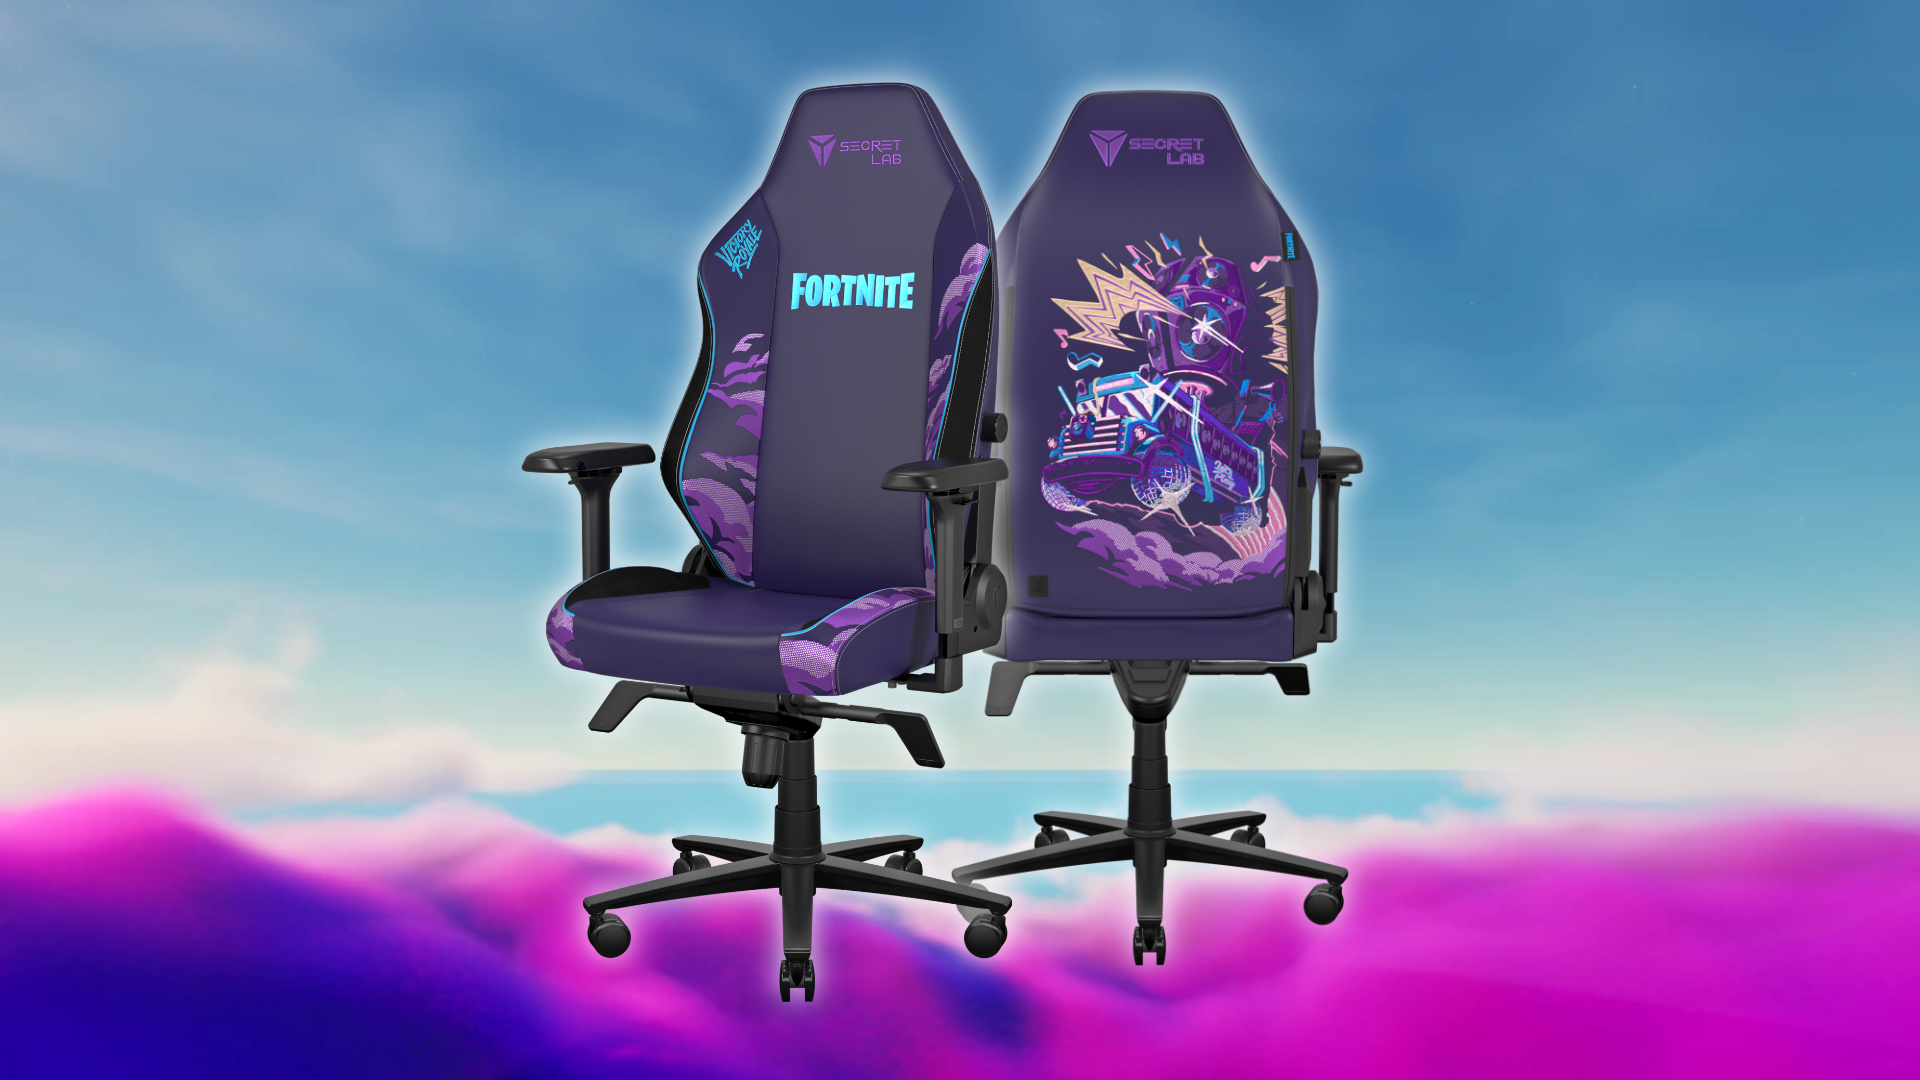 The Fortnite Battle Bus needs these Secretlab gaming chairs